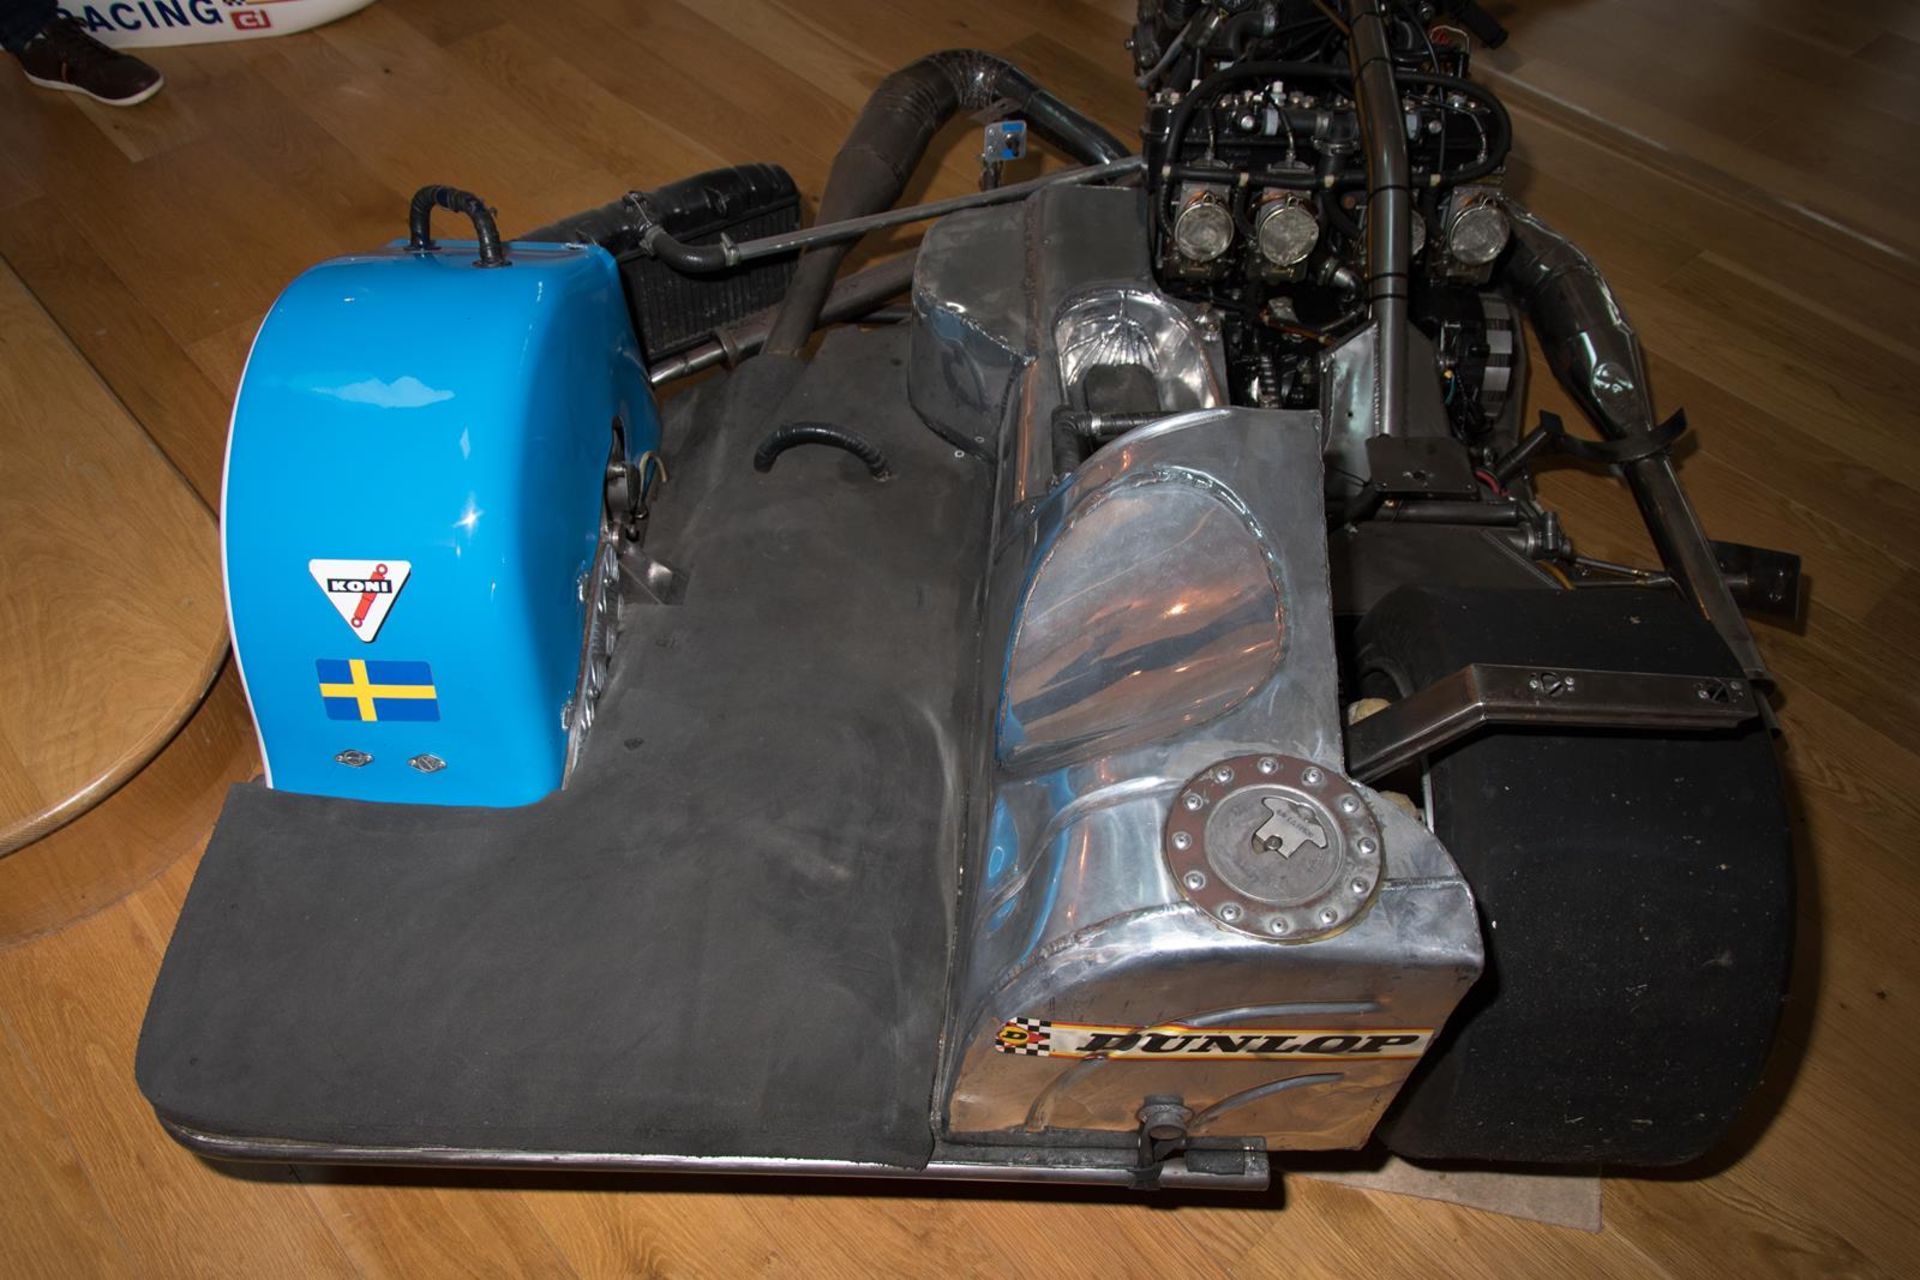 The 1980 Windle TZ 500/700 World Championship and TT winning Sidecar Outfit In 1979 Sidecar - Image 29 of 31